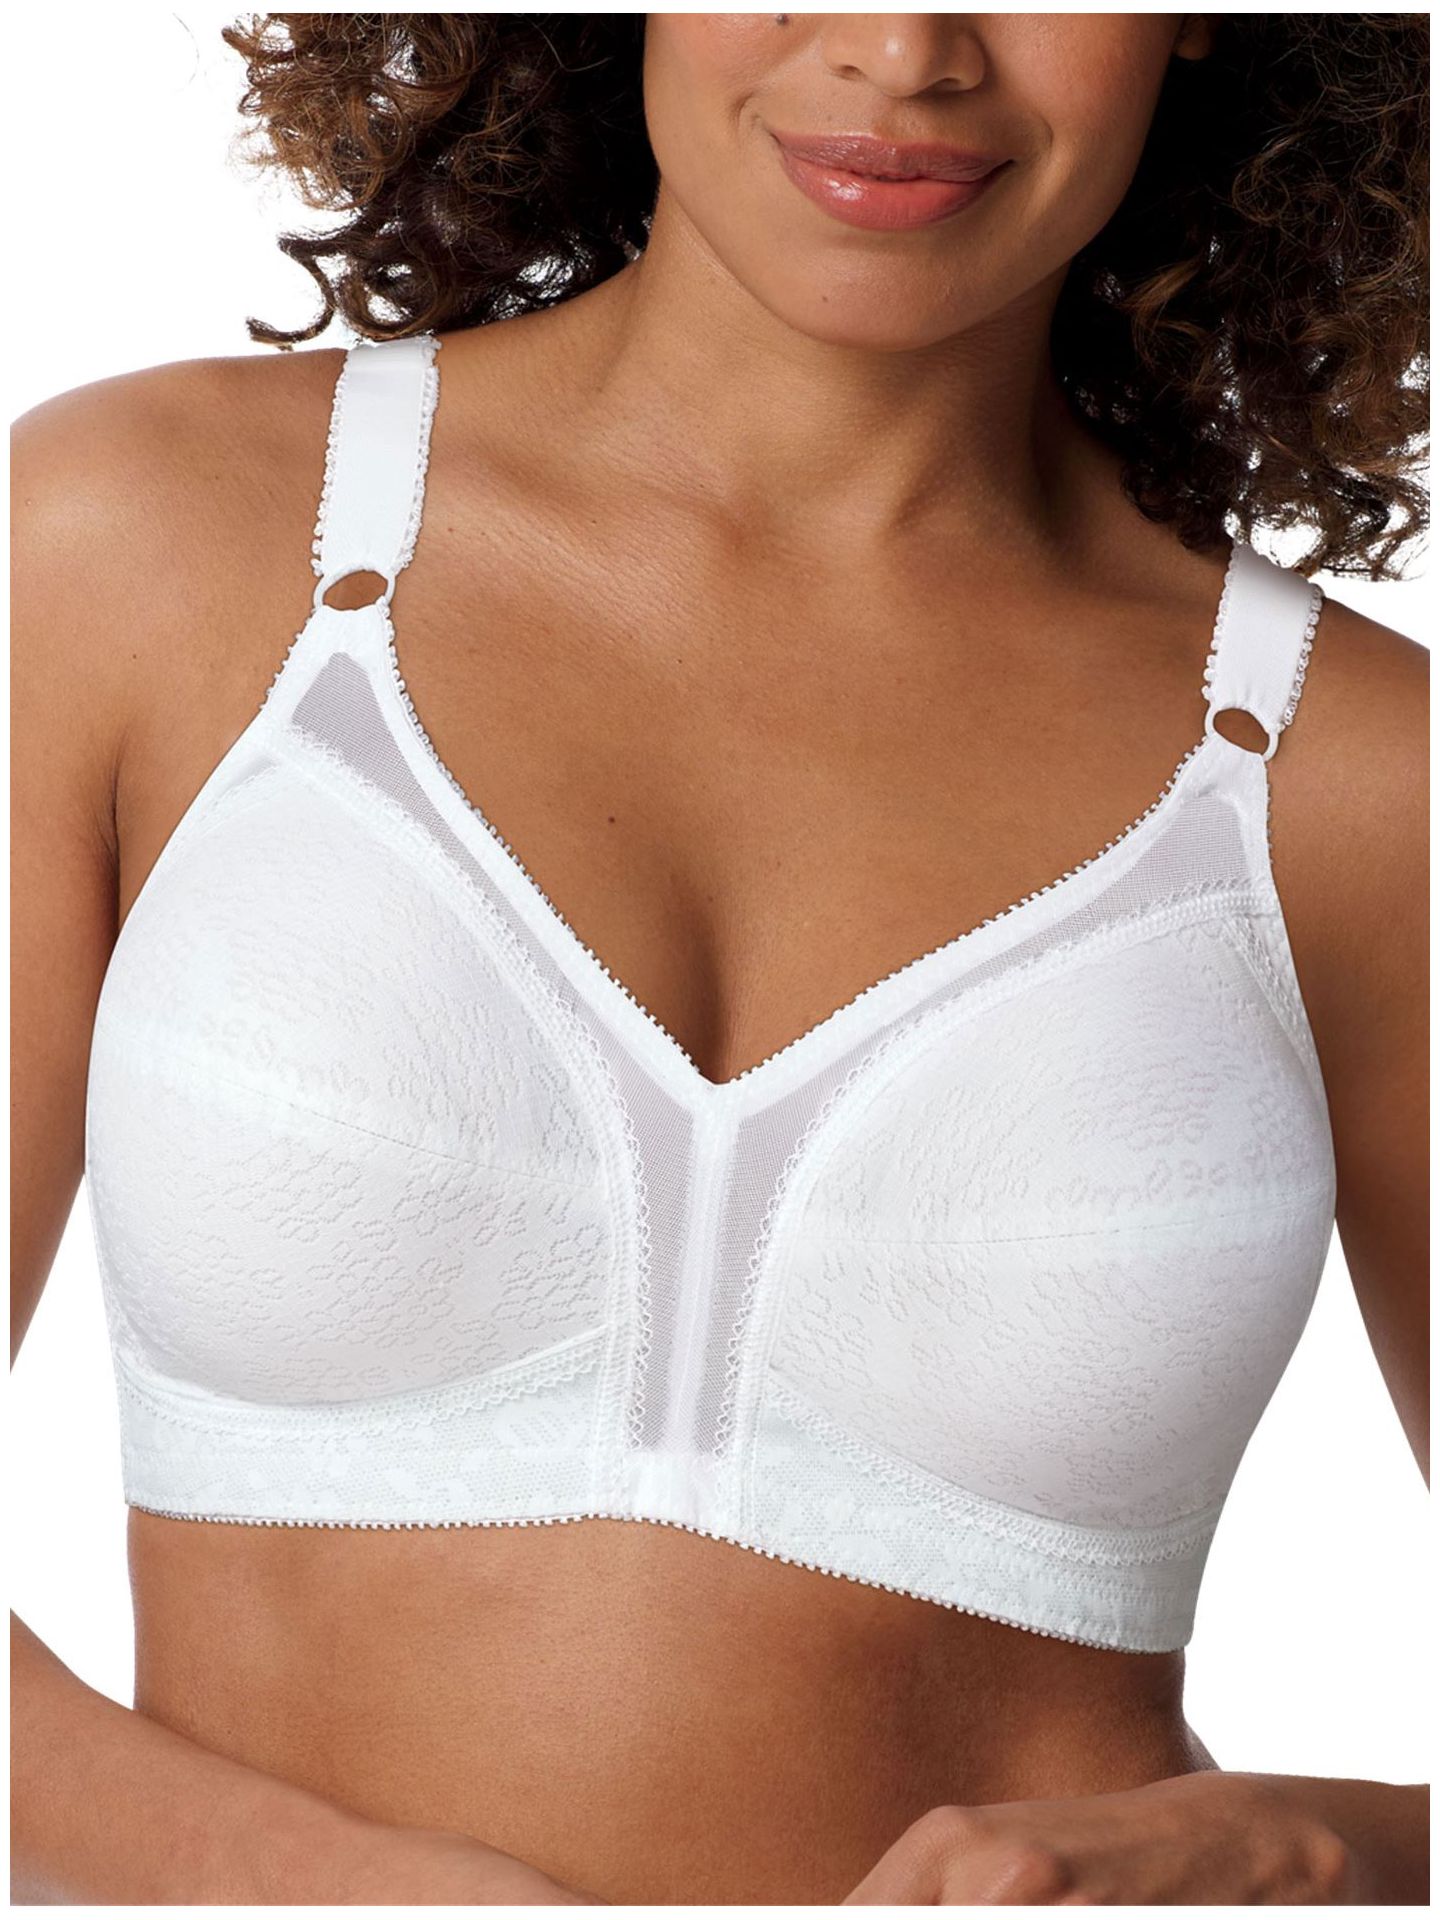 Playtex 18 Hour Full Figure Lace Wirefree Bra 0027 44d 44 D 20/27